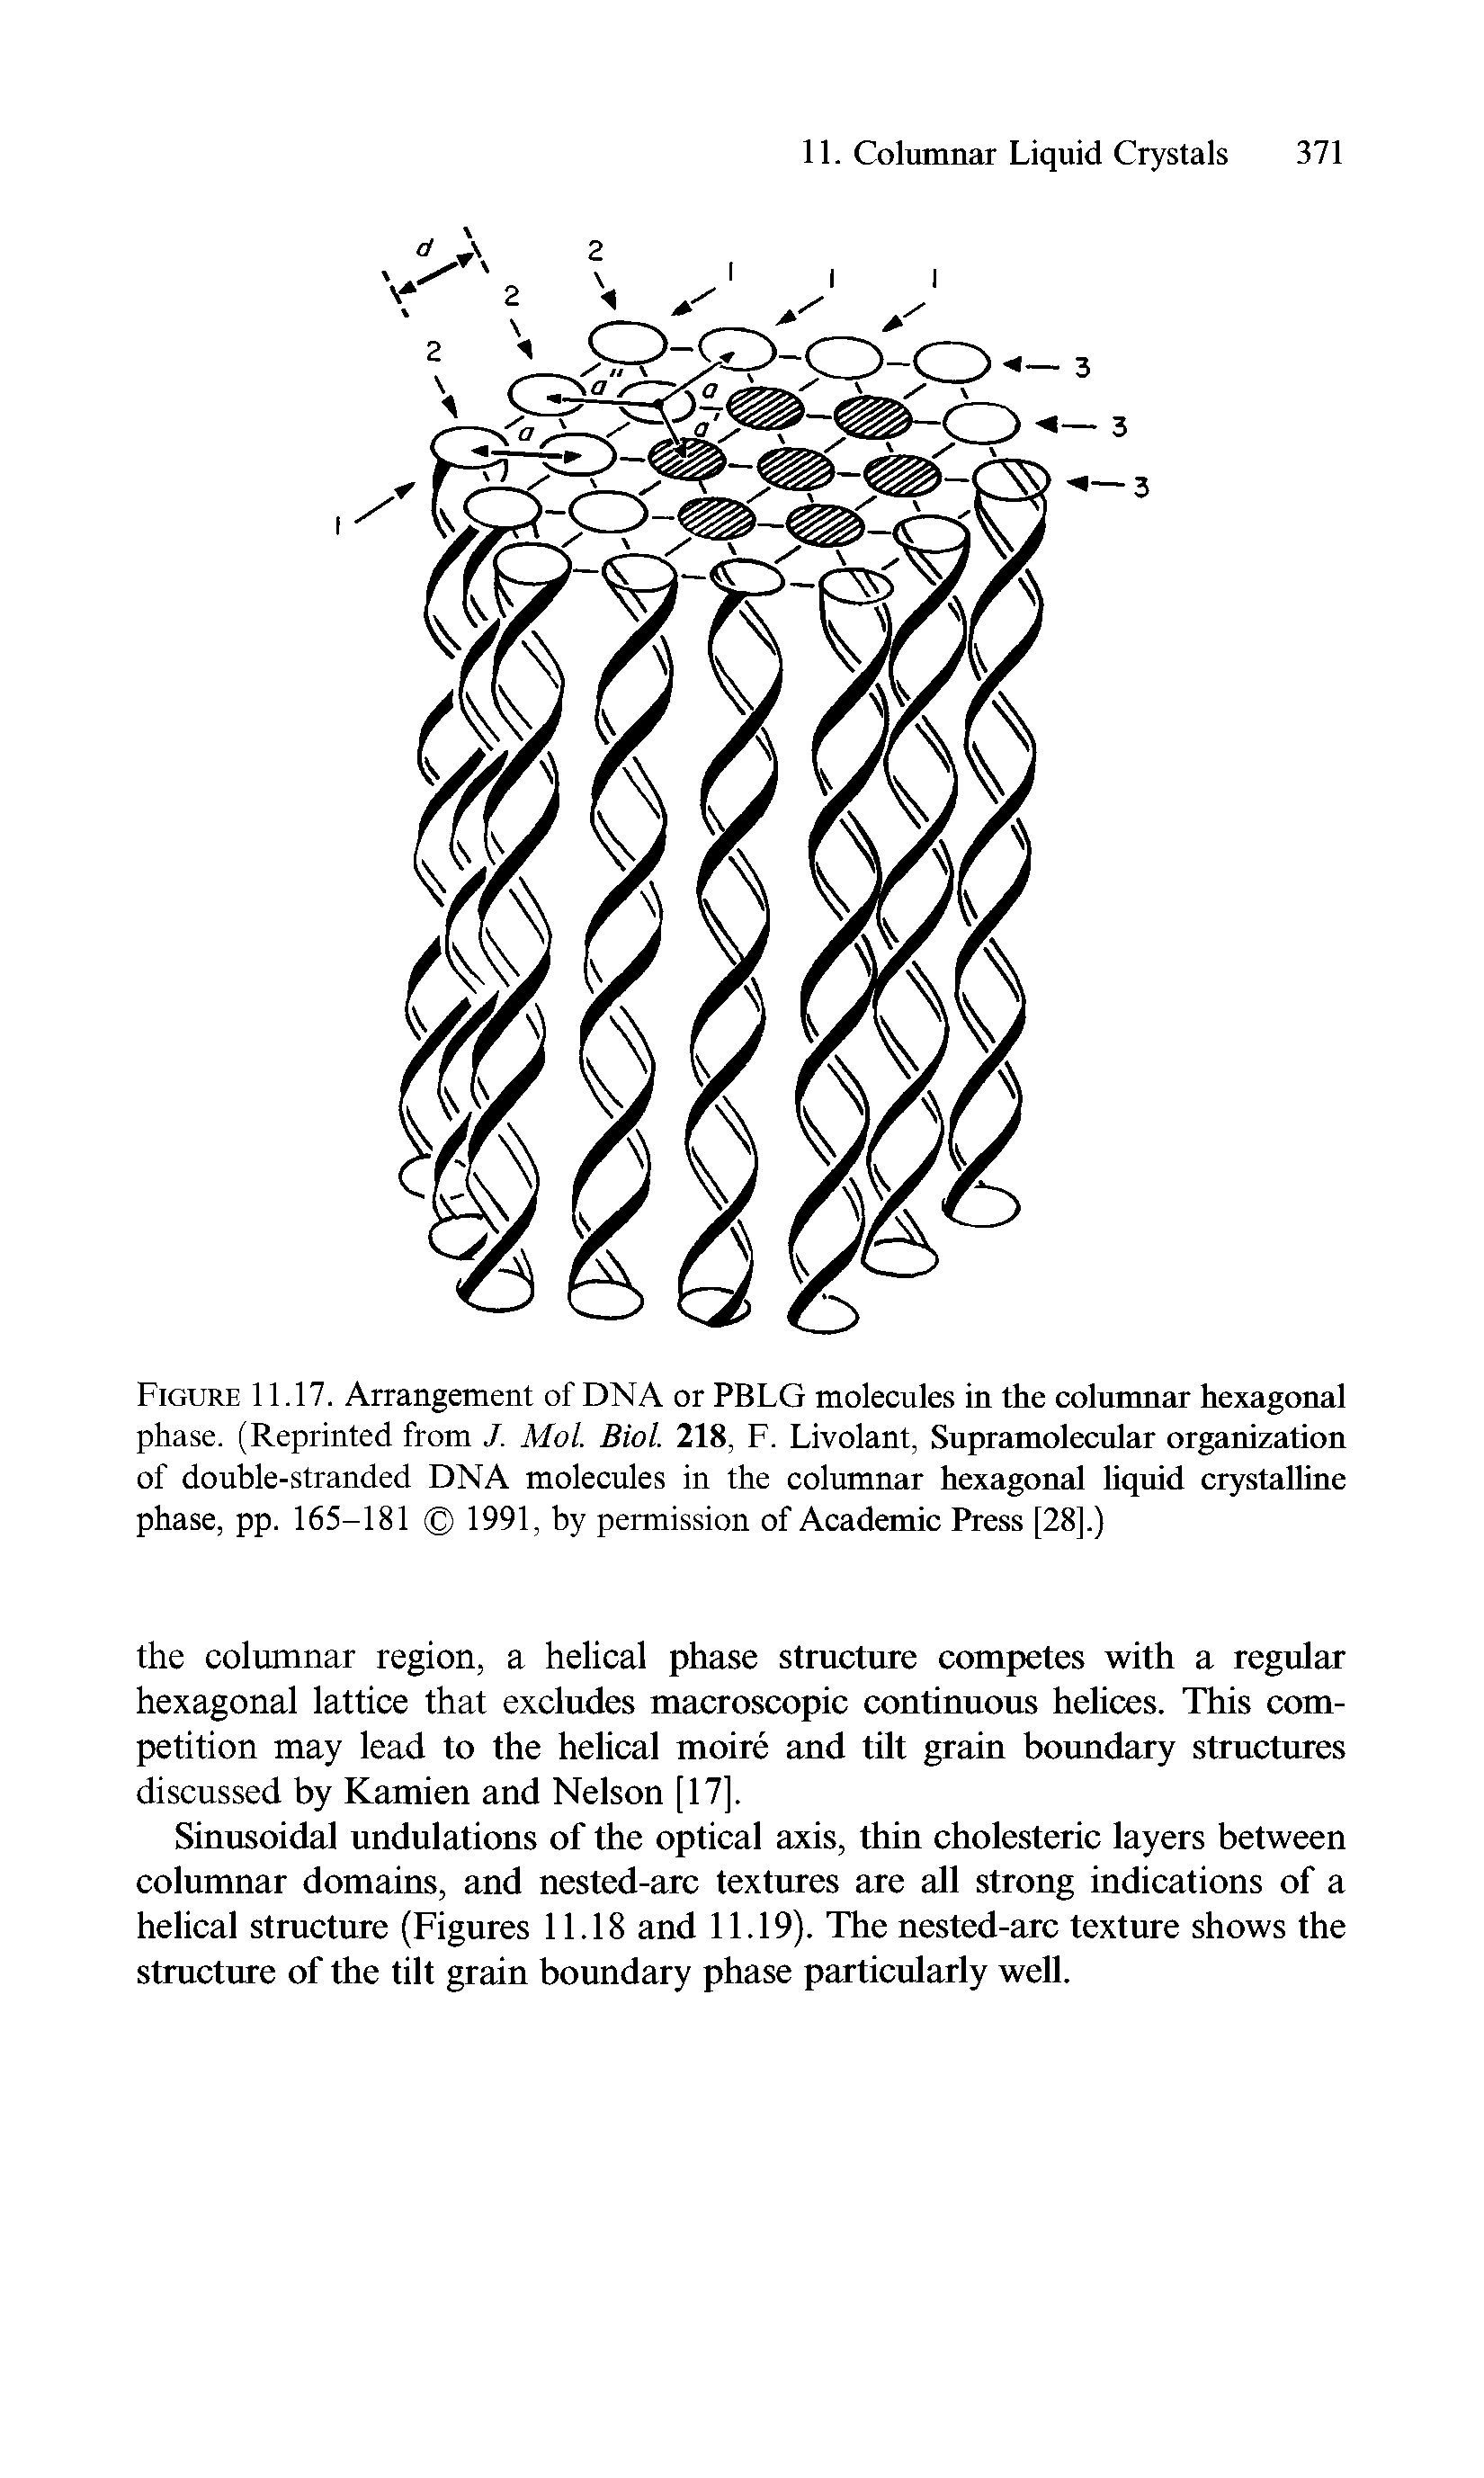 Figure 11.17. Arrangement of DNA or PBLG molecules in the columnar hexagonal phase. (Reprinted from J. Mol. Biol. 218, F. Livolant, Supramolecular organization of double-stranded DNA molecules in the columnar hexagonal liquid crystalline phase, pp. 165-181 1991, by permission of Academic Press [28].)...